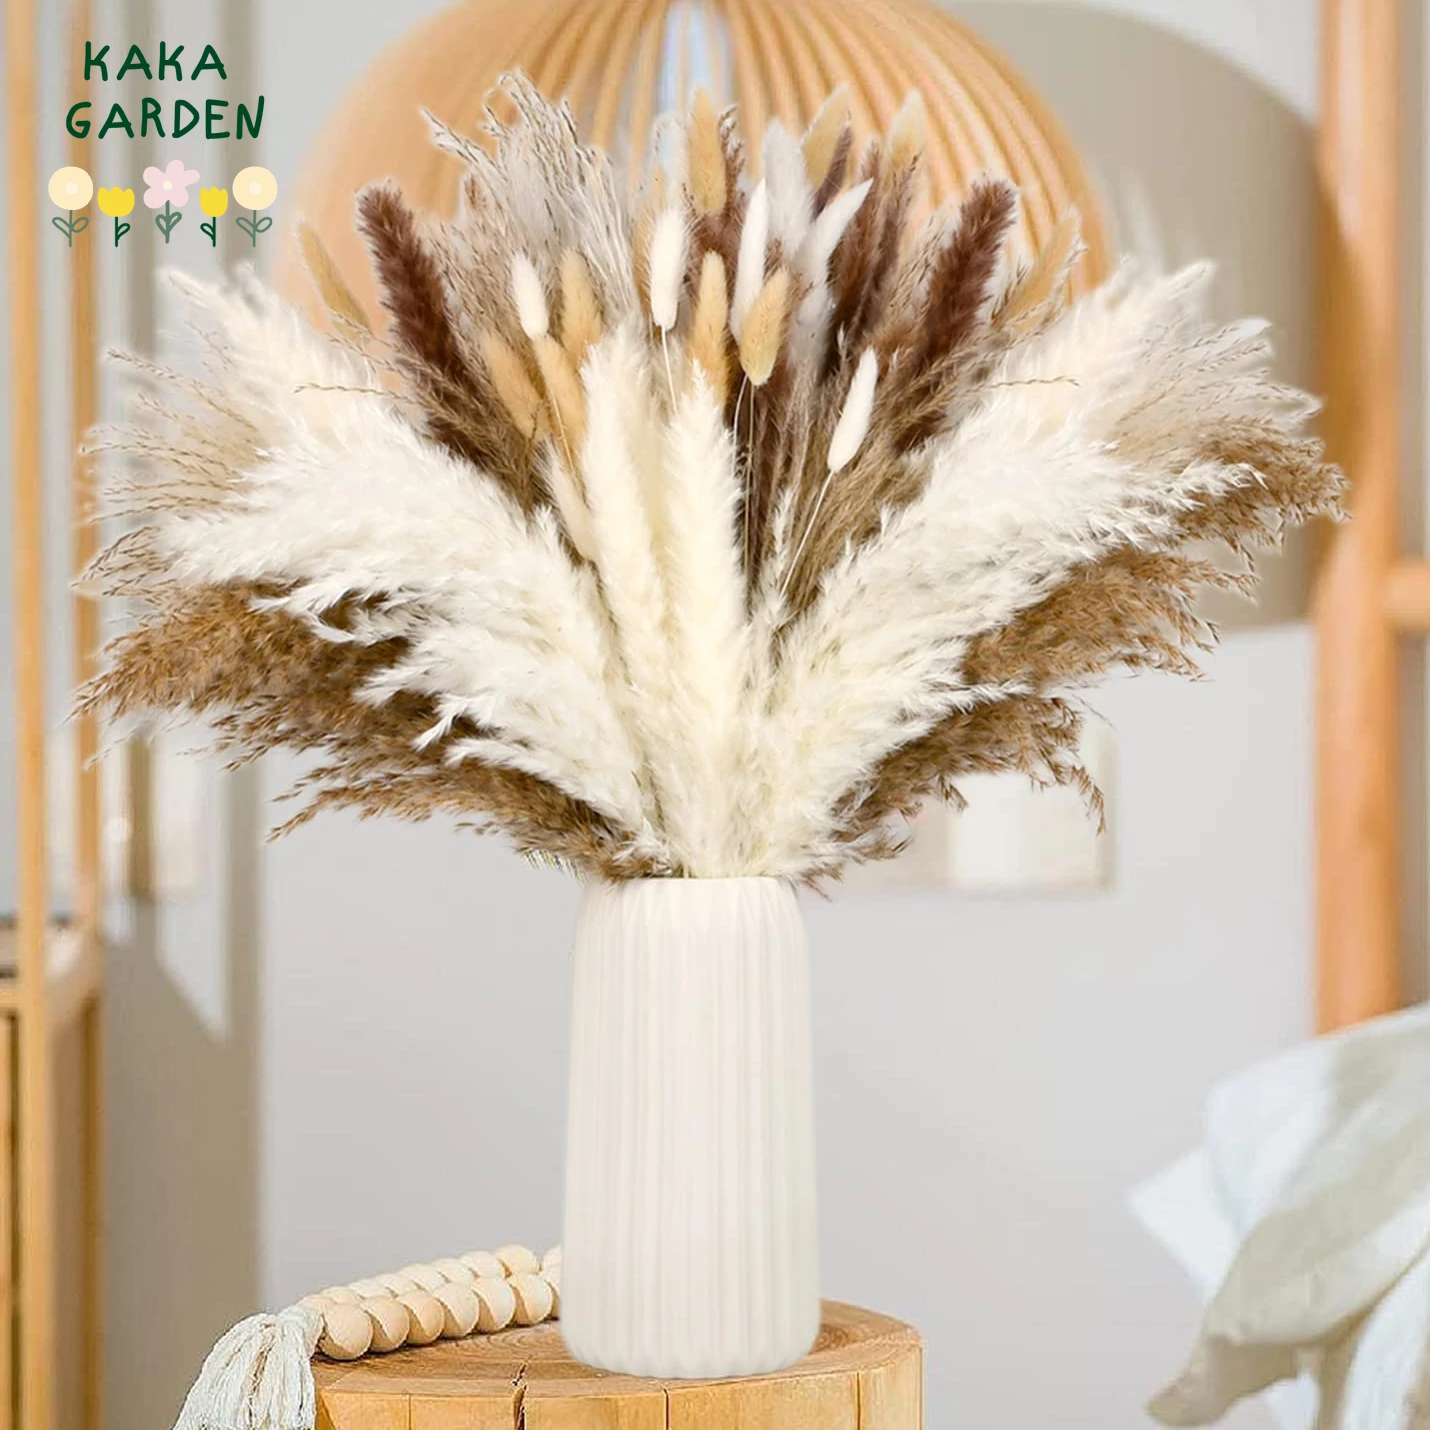 

Dried Flowers Pampas Grass Boho Home Decor Dry Plant Babys Breath Bouquet Wedding Decoration Natural Reeds Office Table Supplies